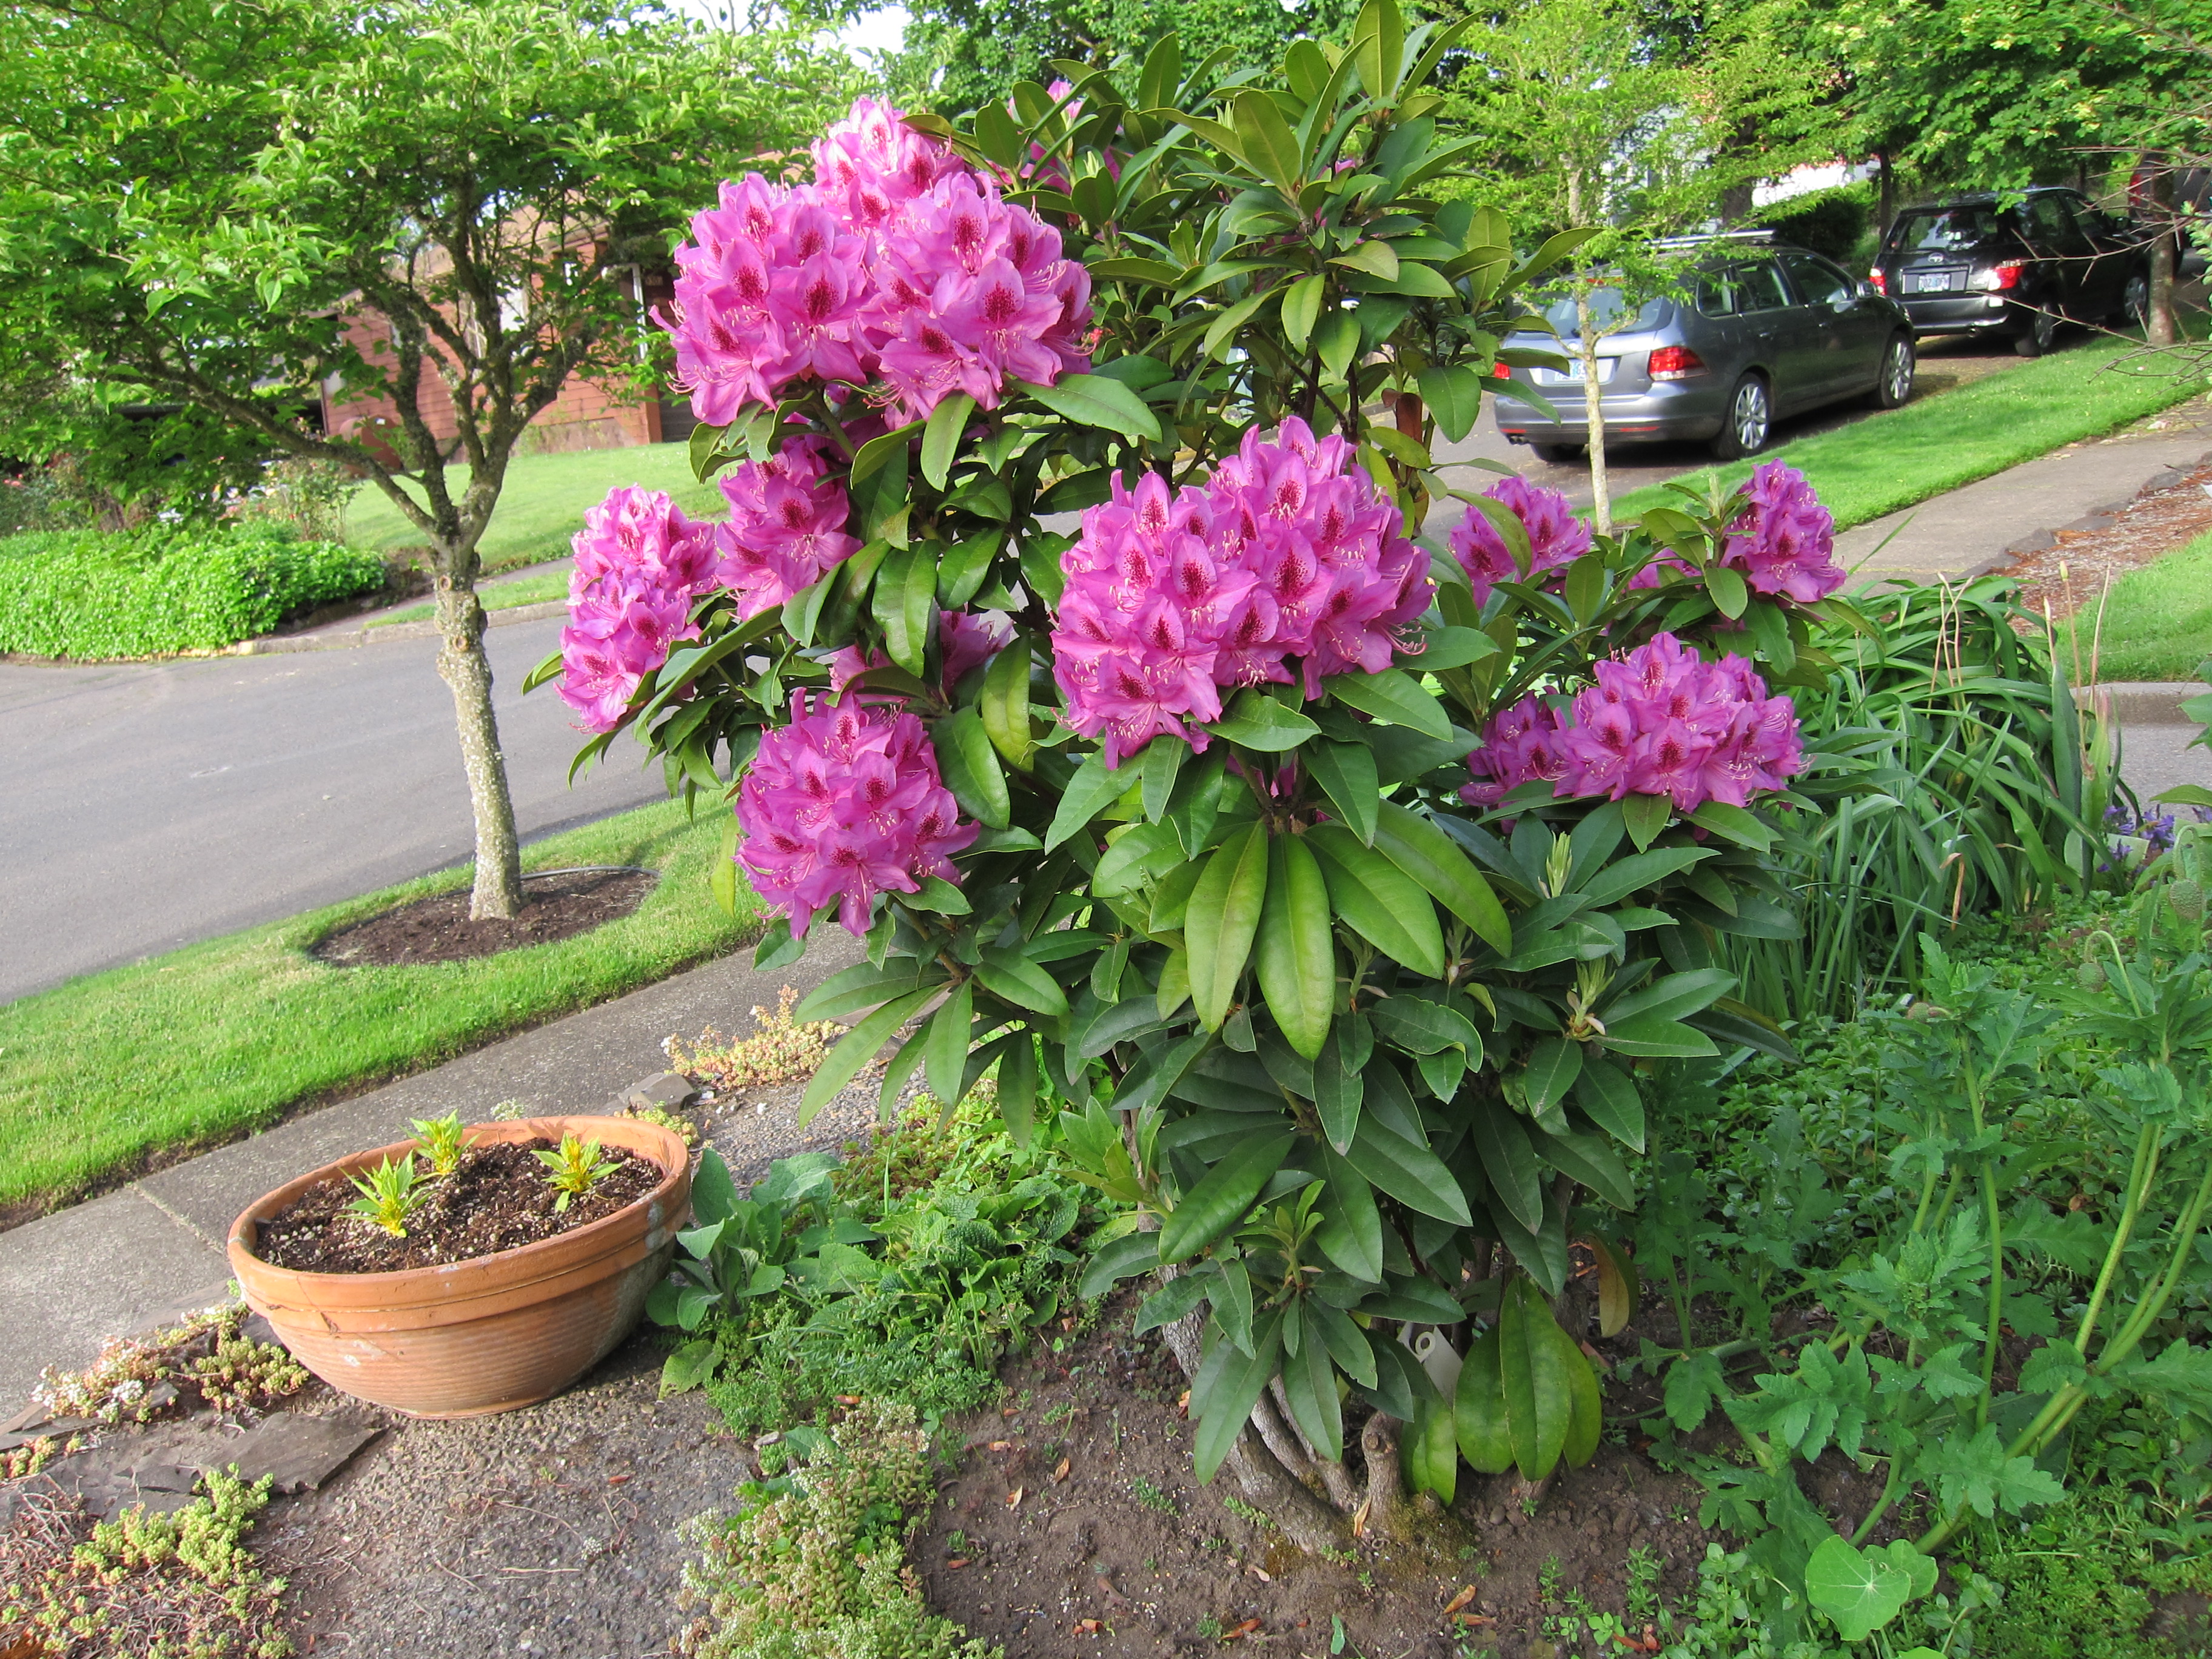 Rhodie in May